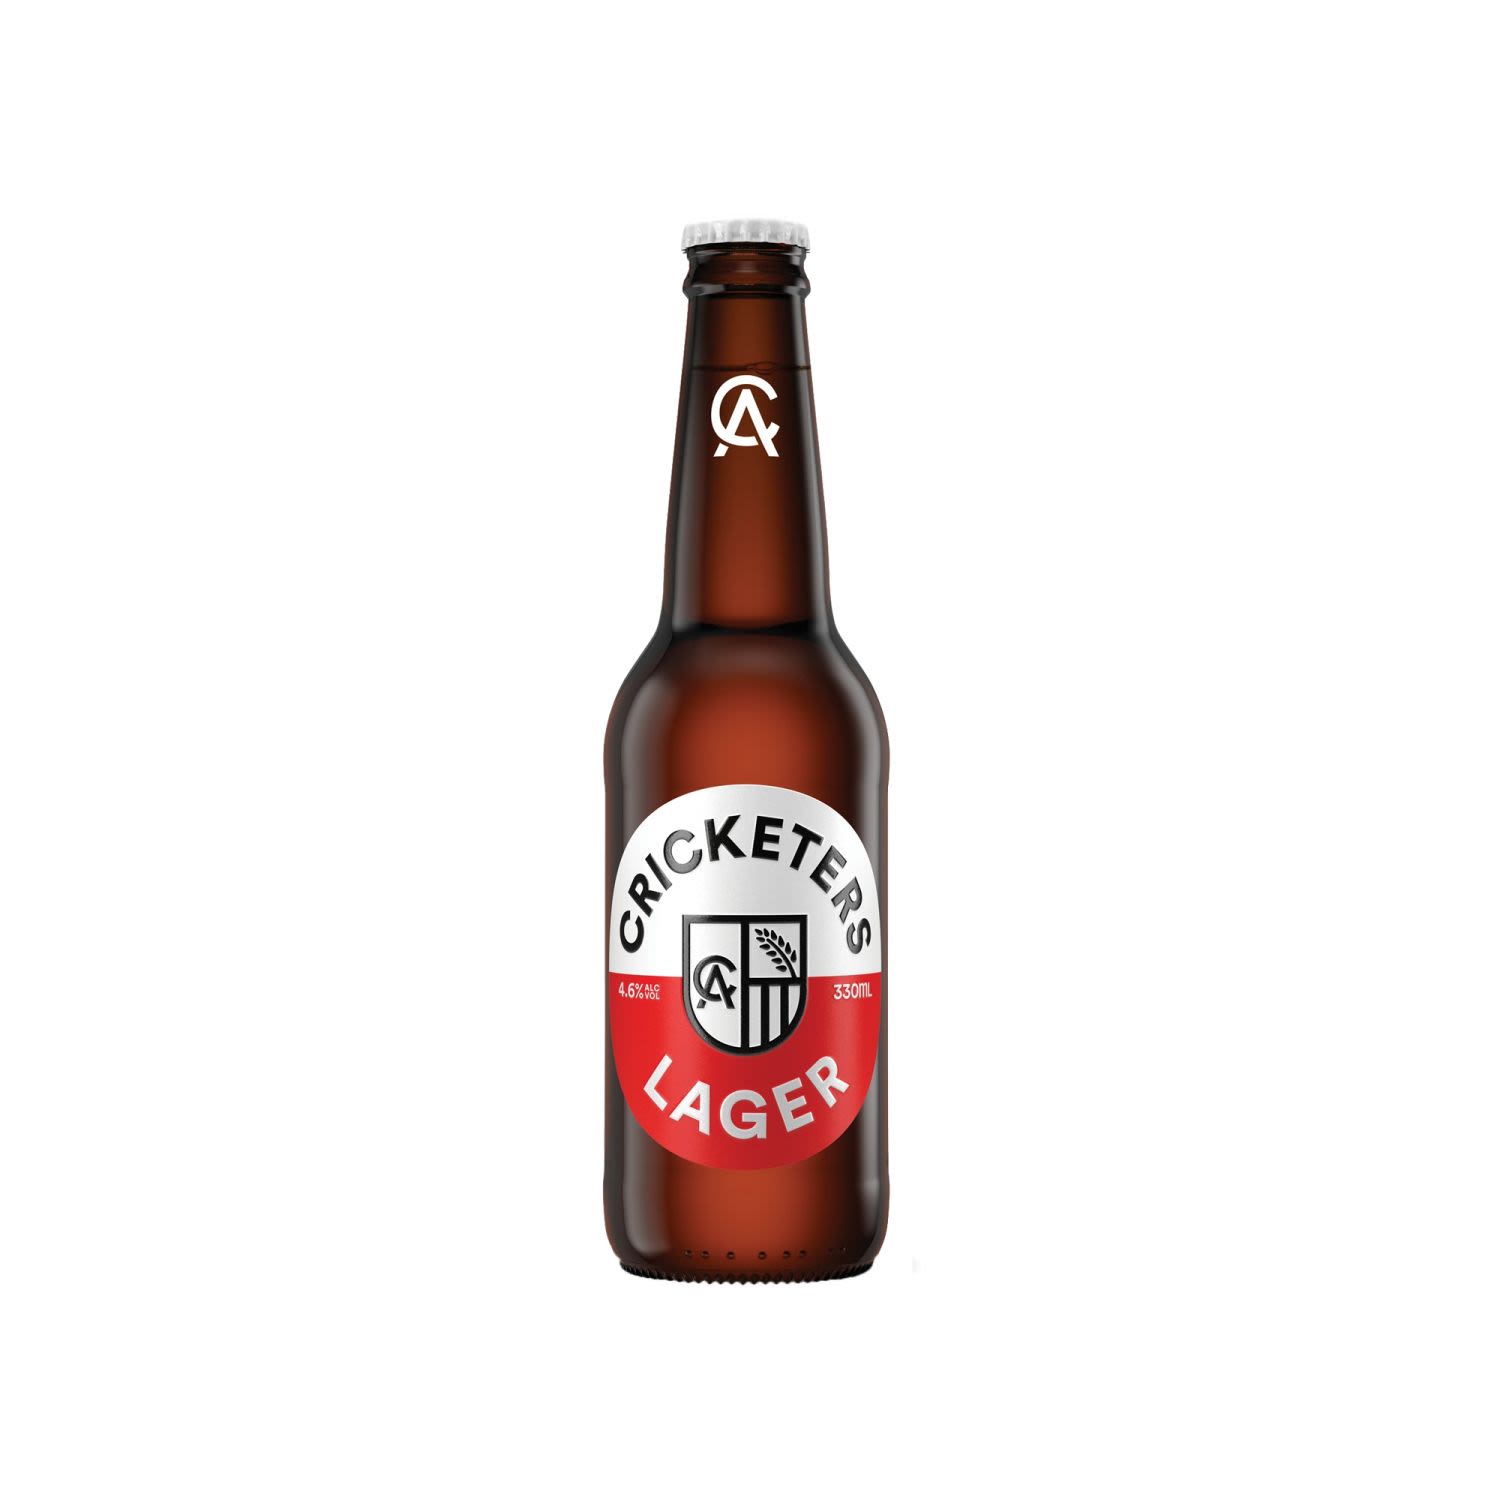 Cricketers Lager Bottle 330mL